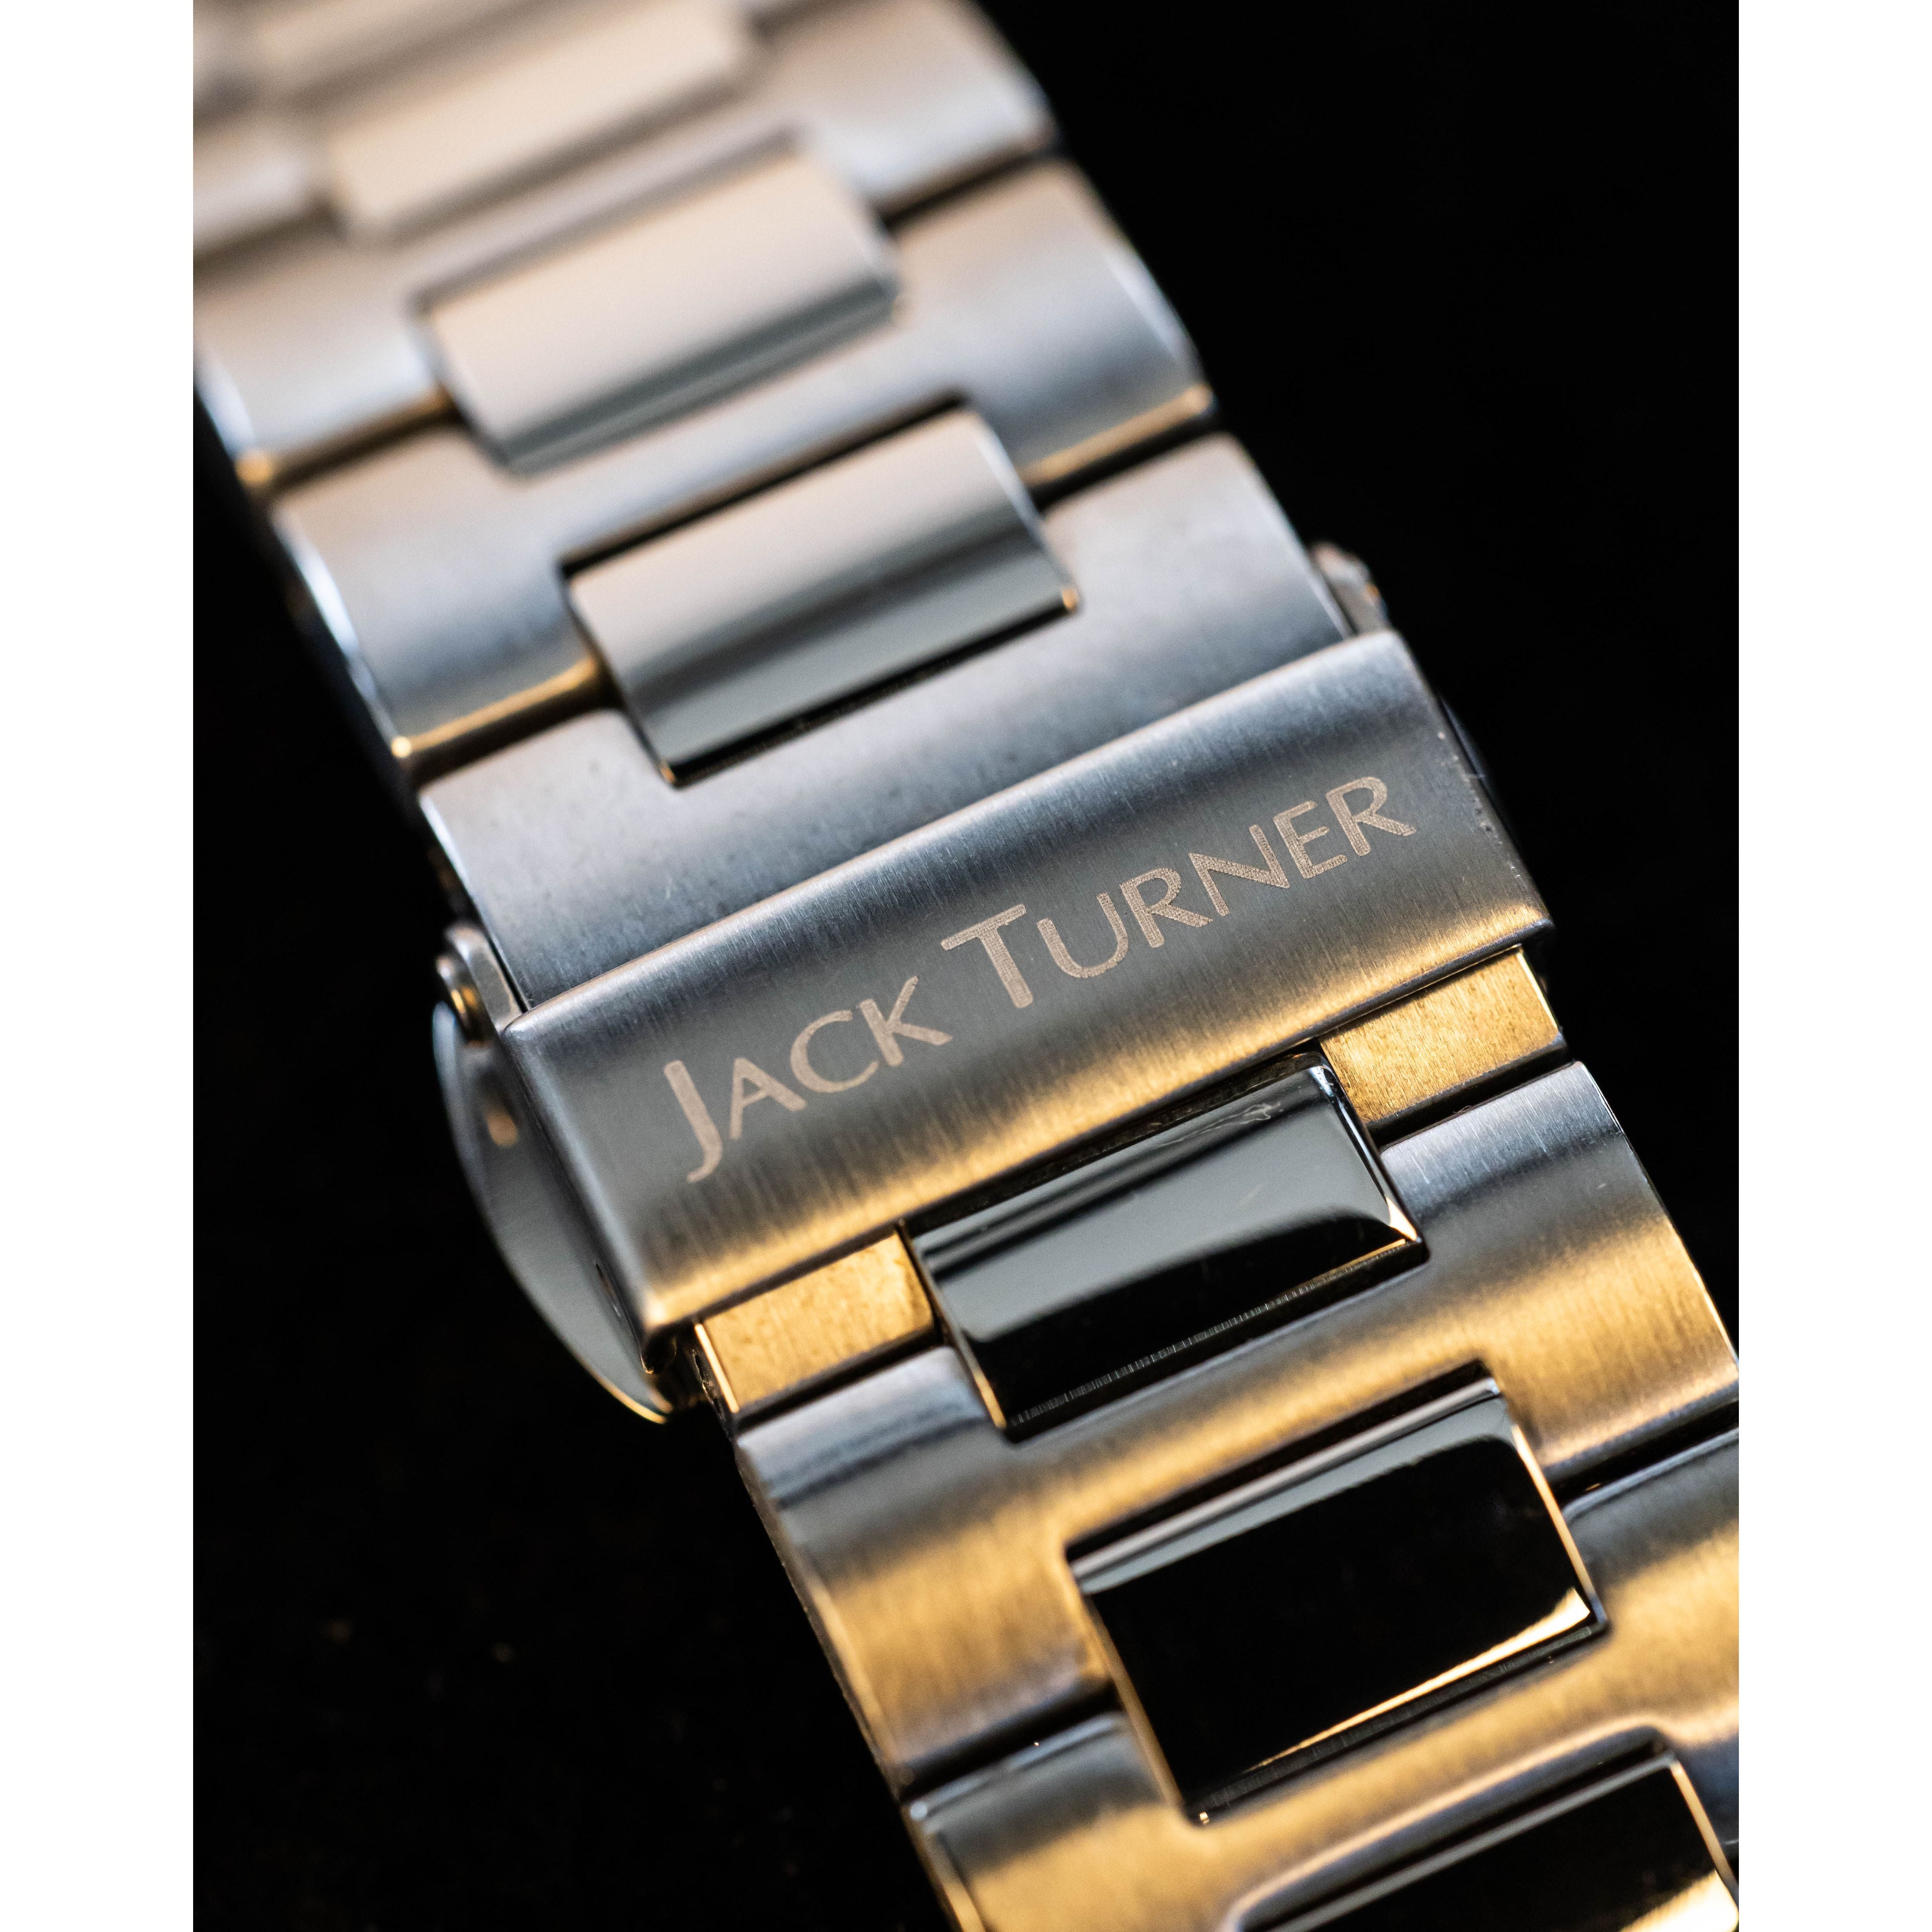 Jack Turner “Meridian” Limited Edition Swiss Automatic Movement Sports Watch